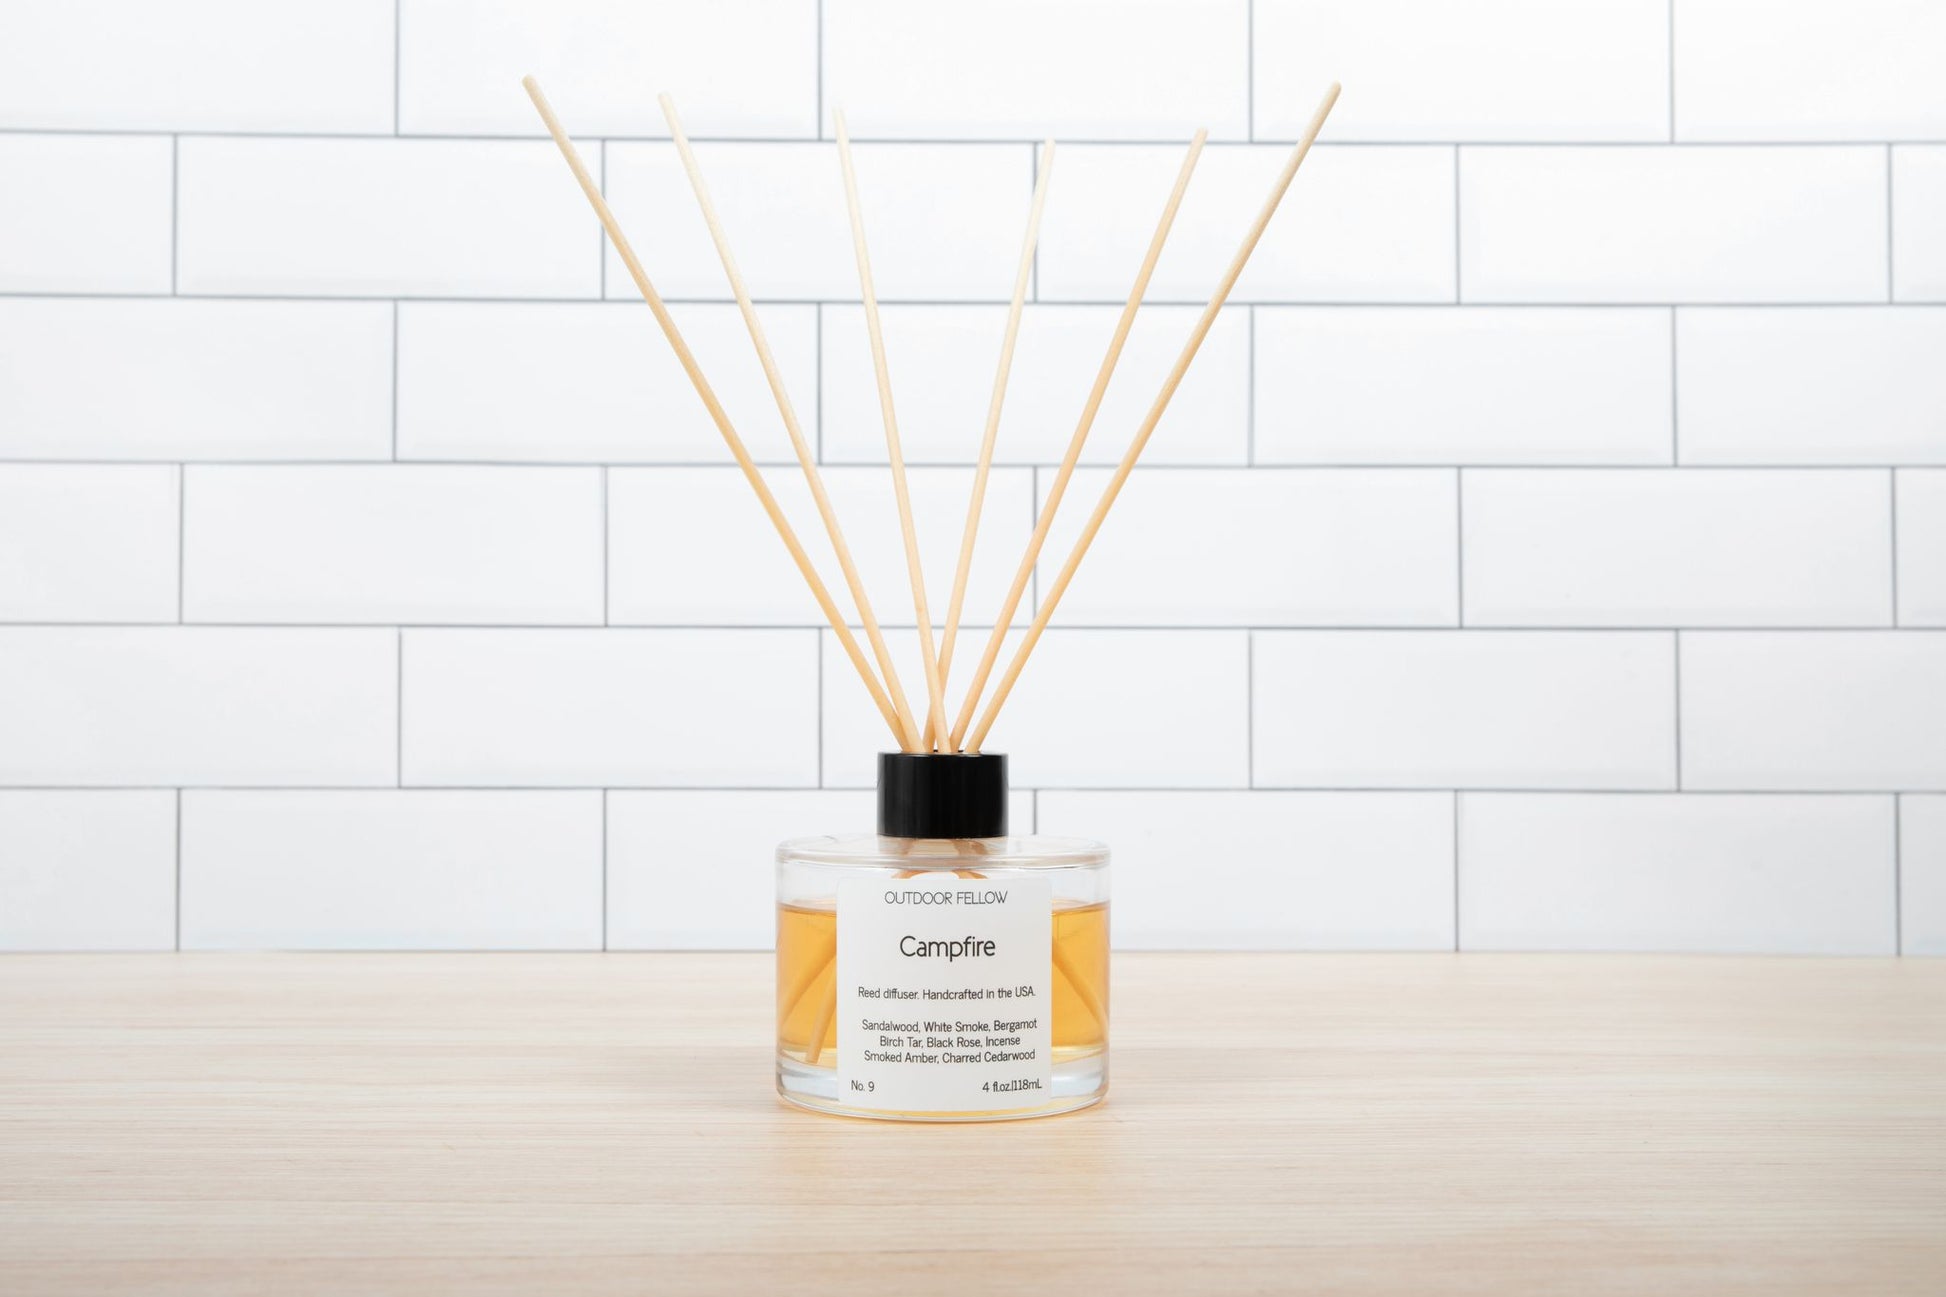 Campfire reed diffuser on a butcher block surface with white subway tile in the background